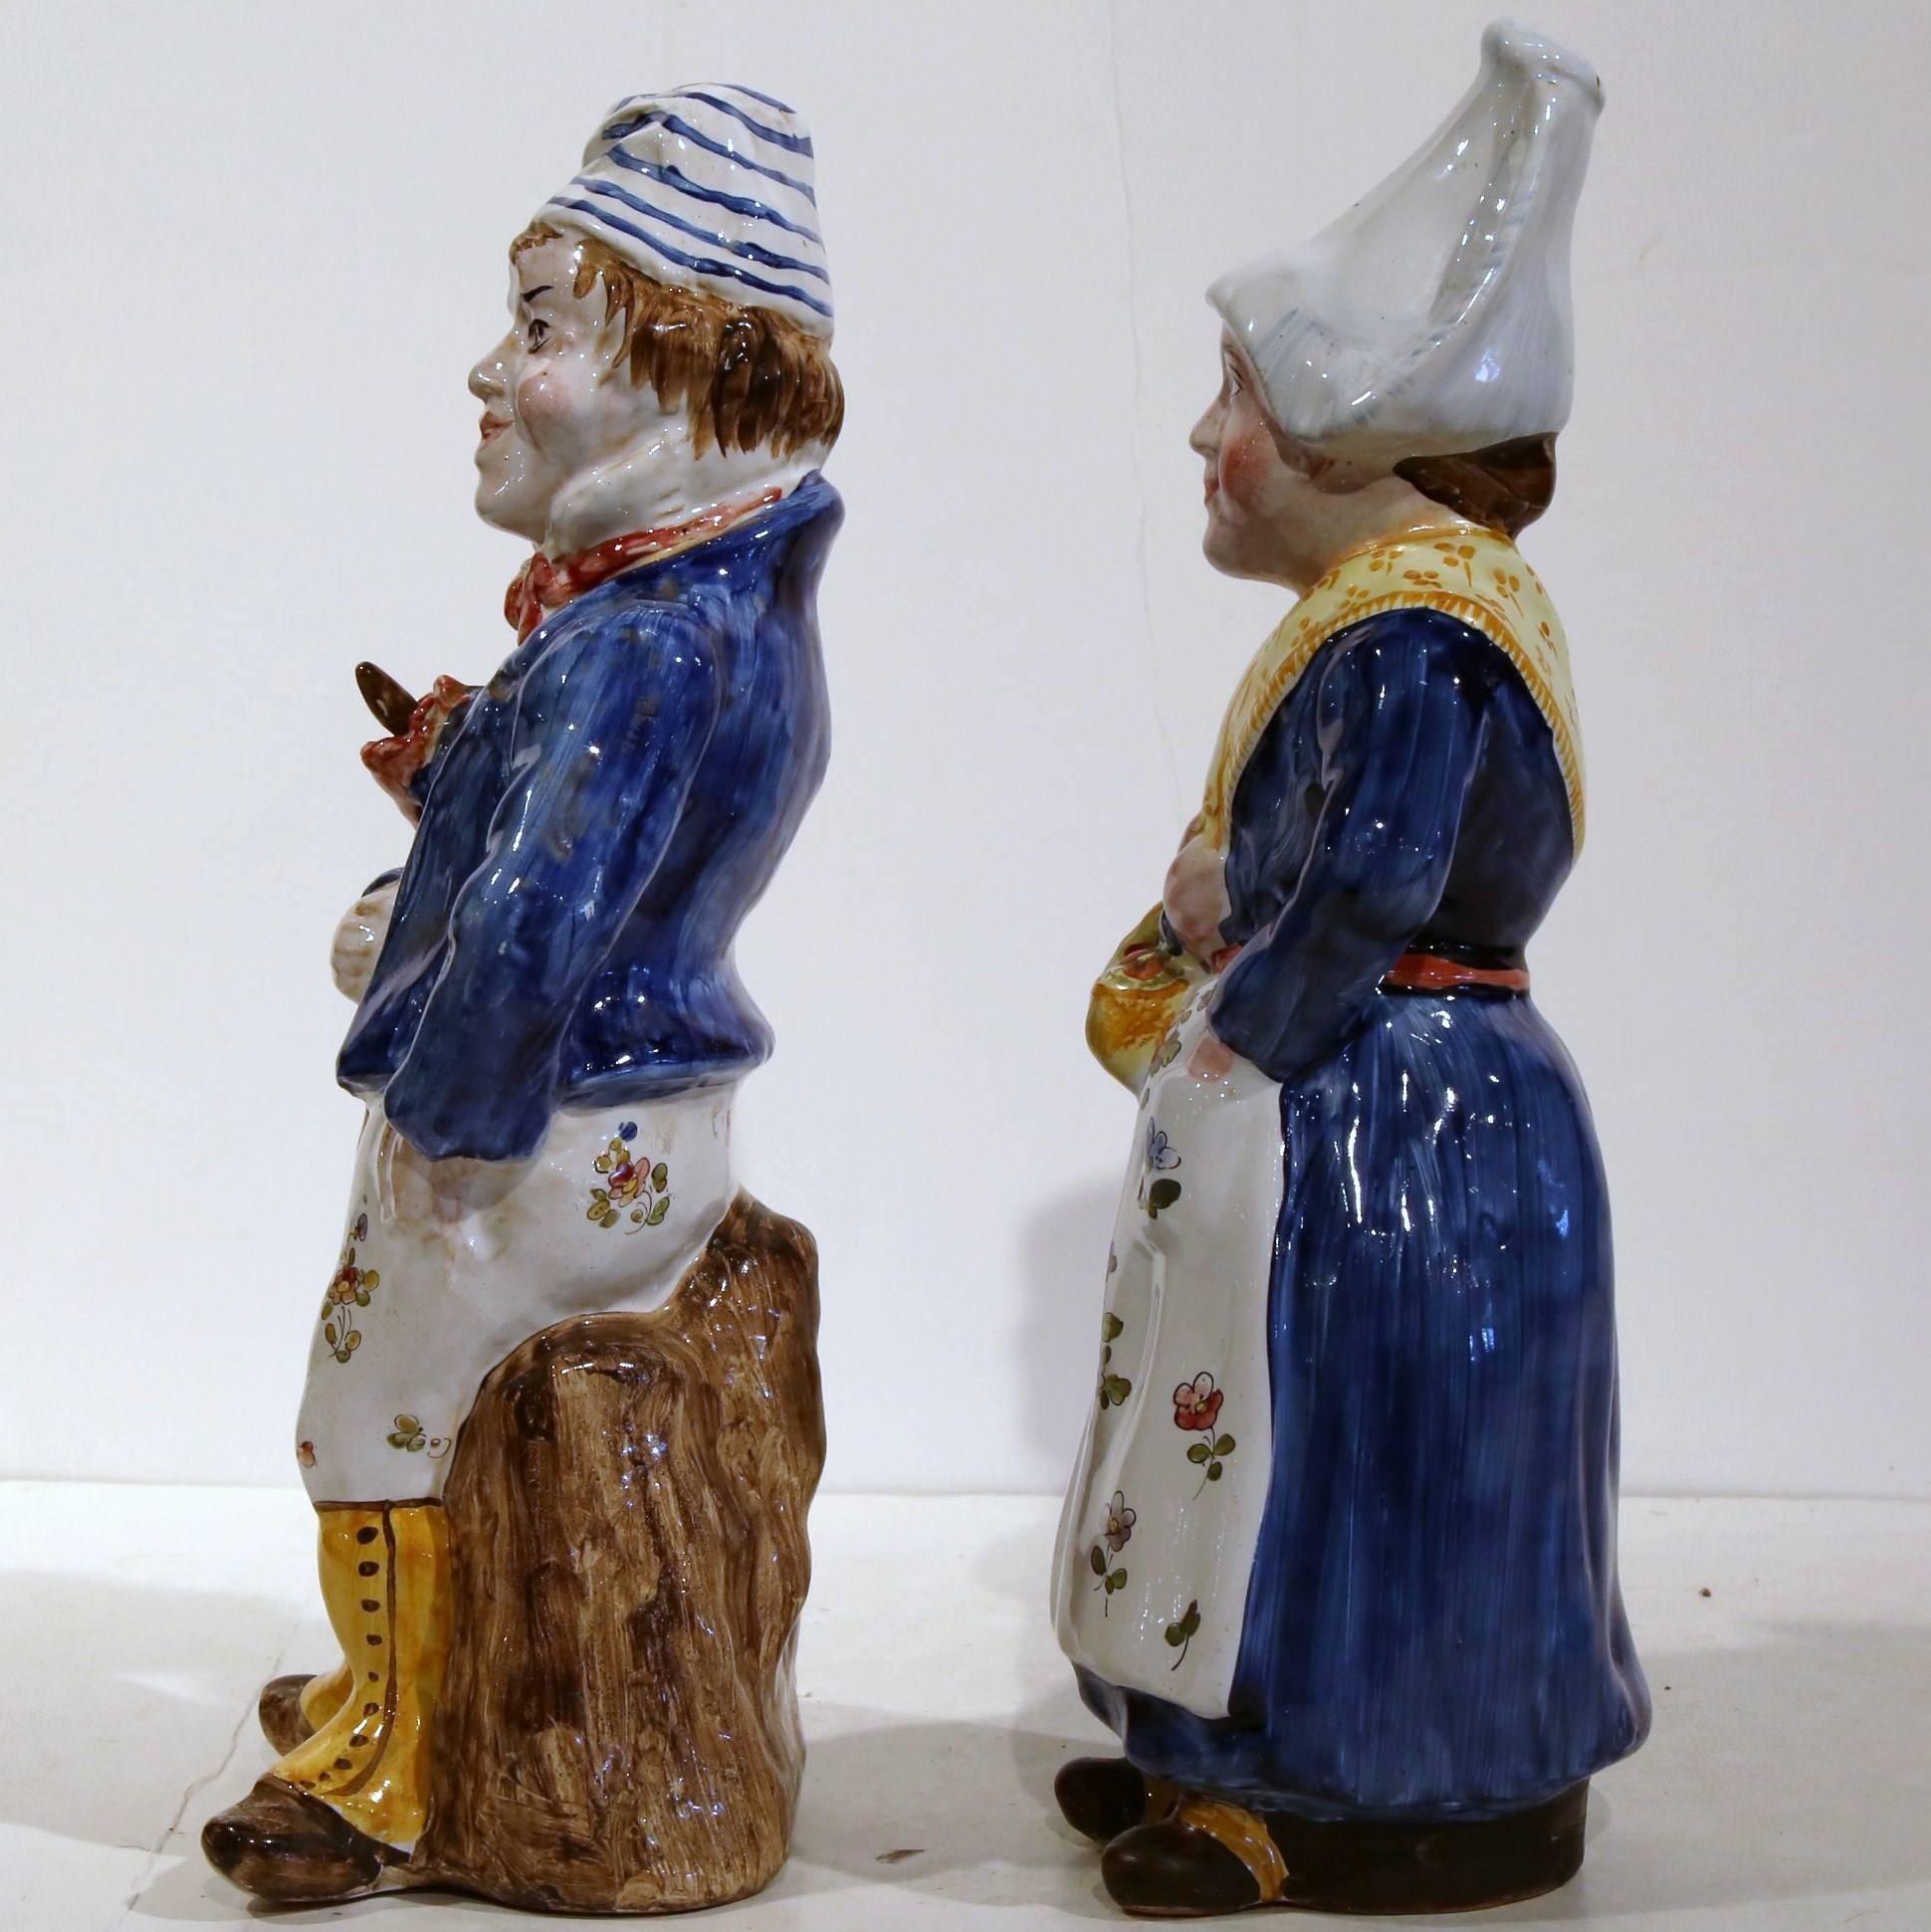 Pair of antique colorful hand-painted Majolica figurines from France; crafted, circa 1890, the sculptures features a man and a woman in traditional clothing. Excellent condition with wonderful colors with markings QR on the bottom.
Measures: 5